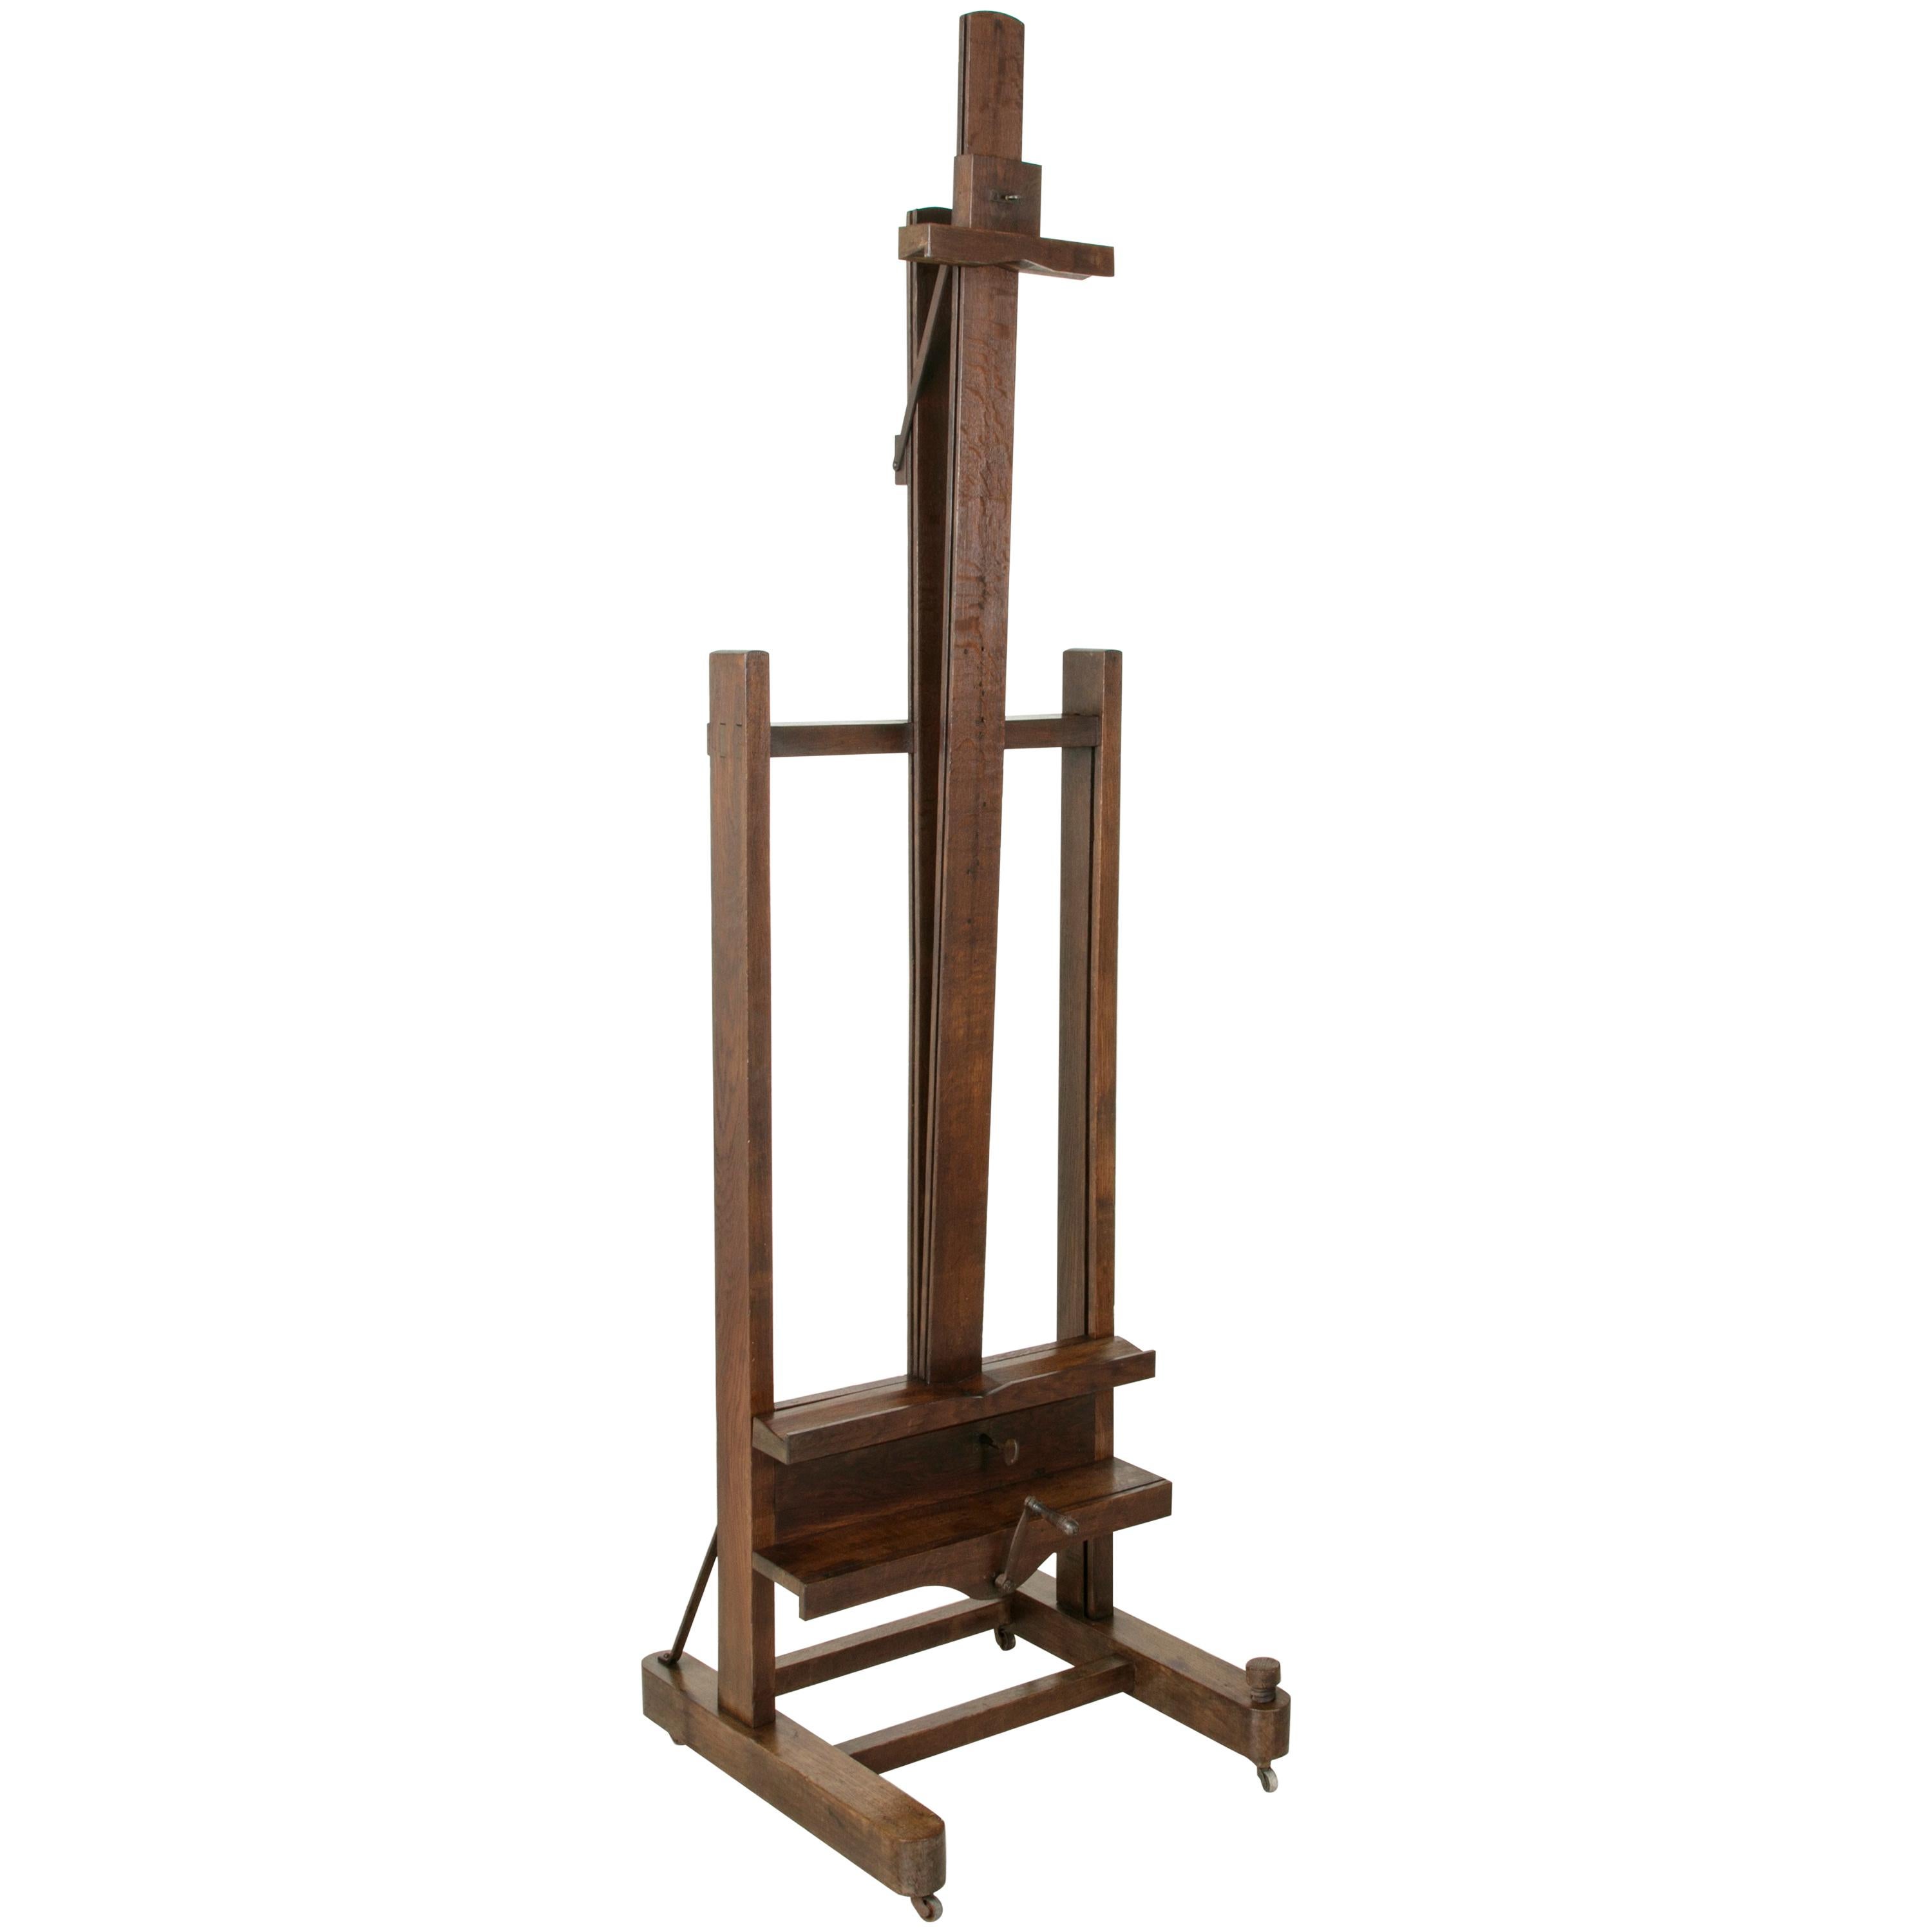 Rare Adjustable Two Ways French Oak Floor Easel with Double Mechanism circa 1900